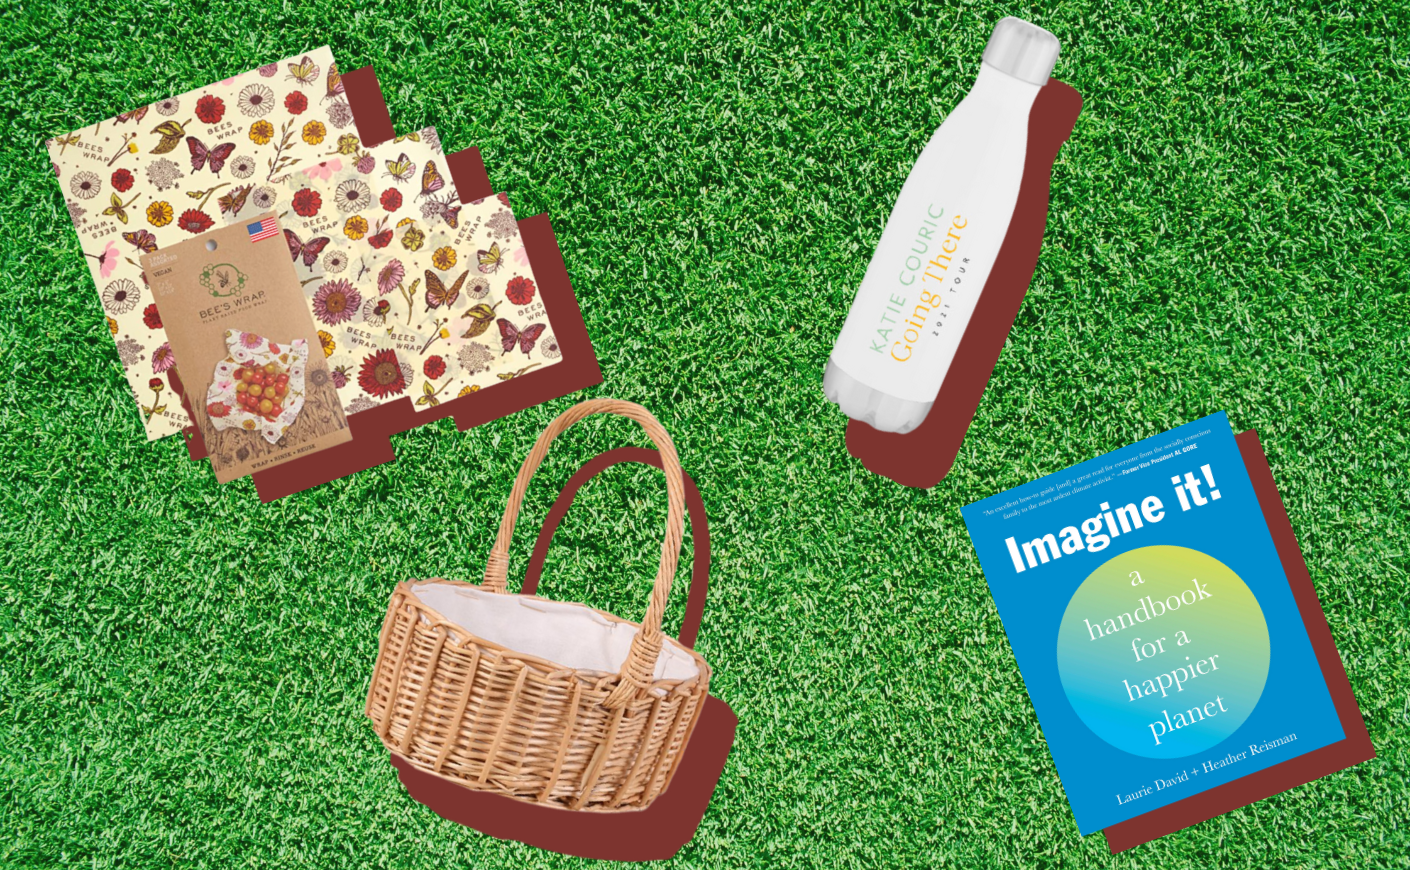 eco-friendly gifts on grass